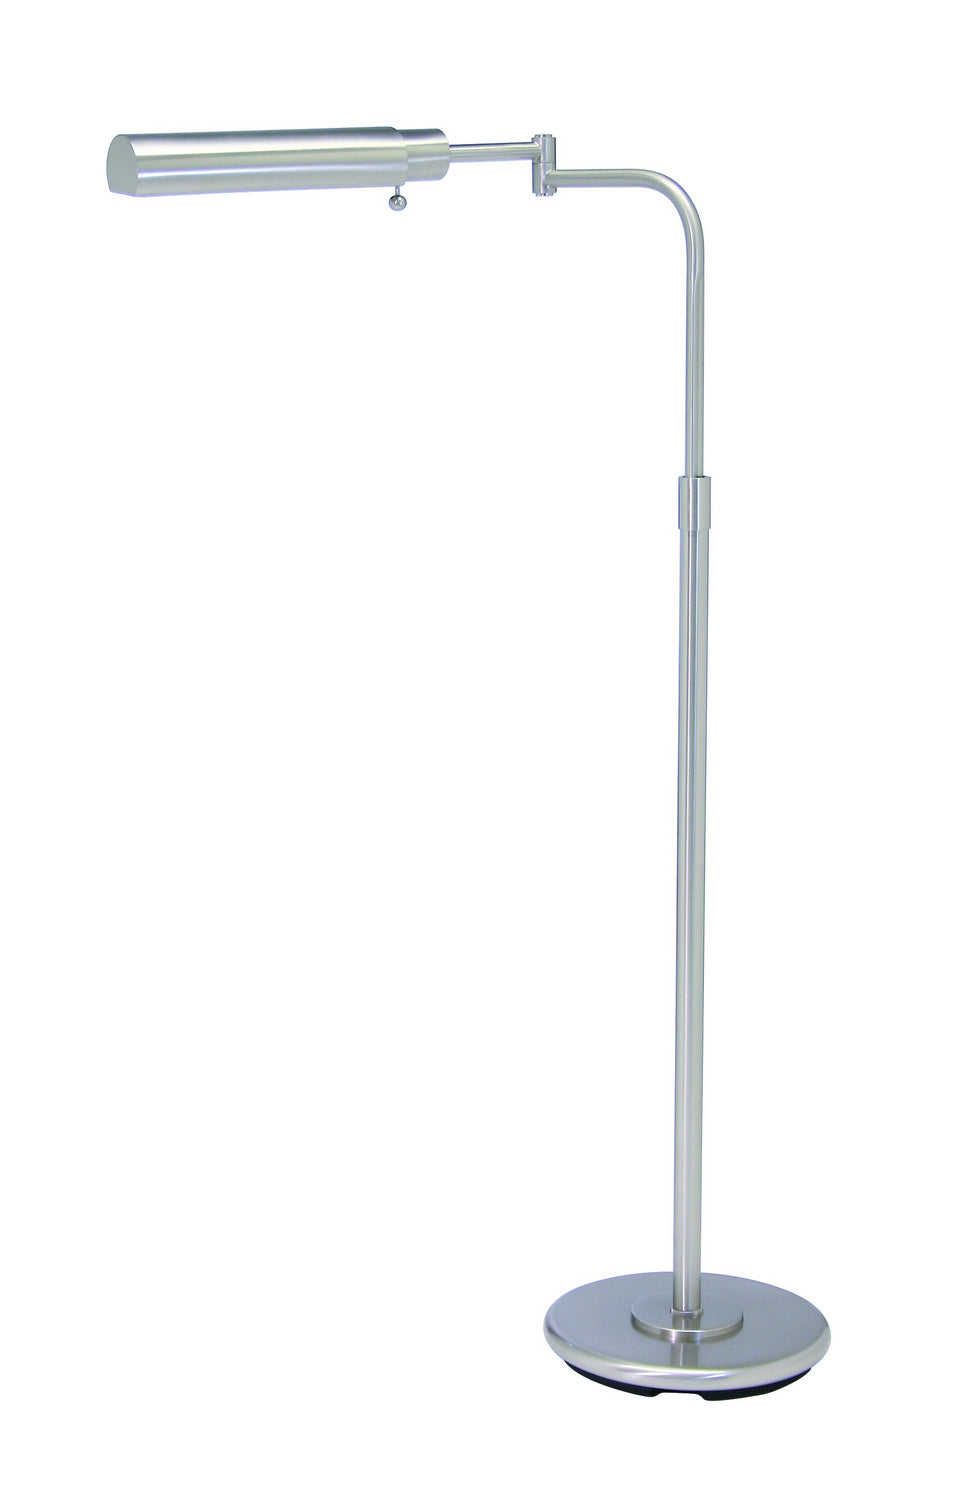 House of Troy - PH100-52-F - One Light Floor Lamp - Home/Office - Satin Nickel